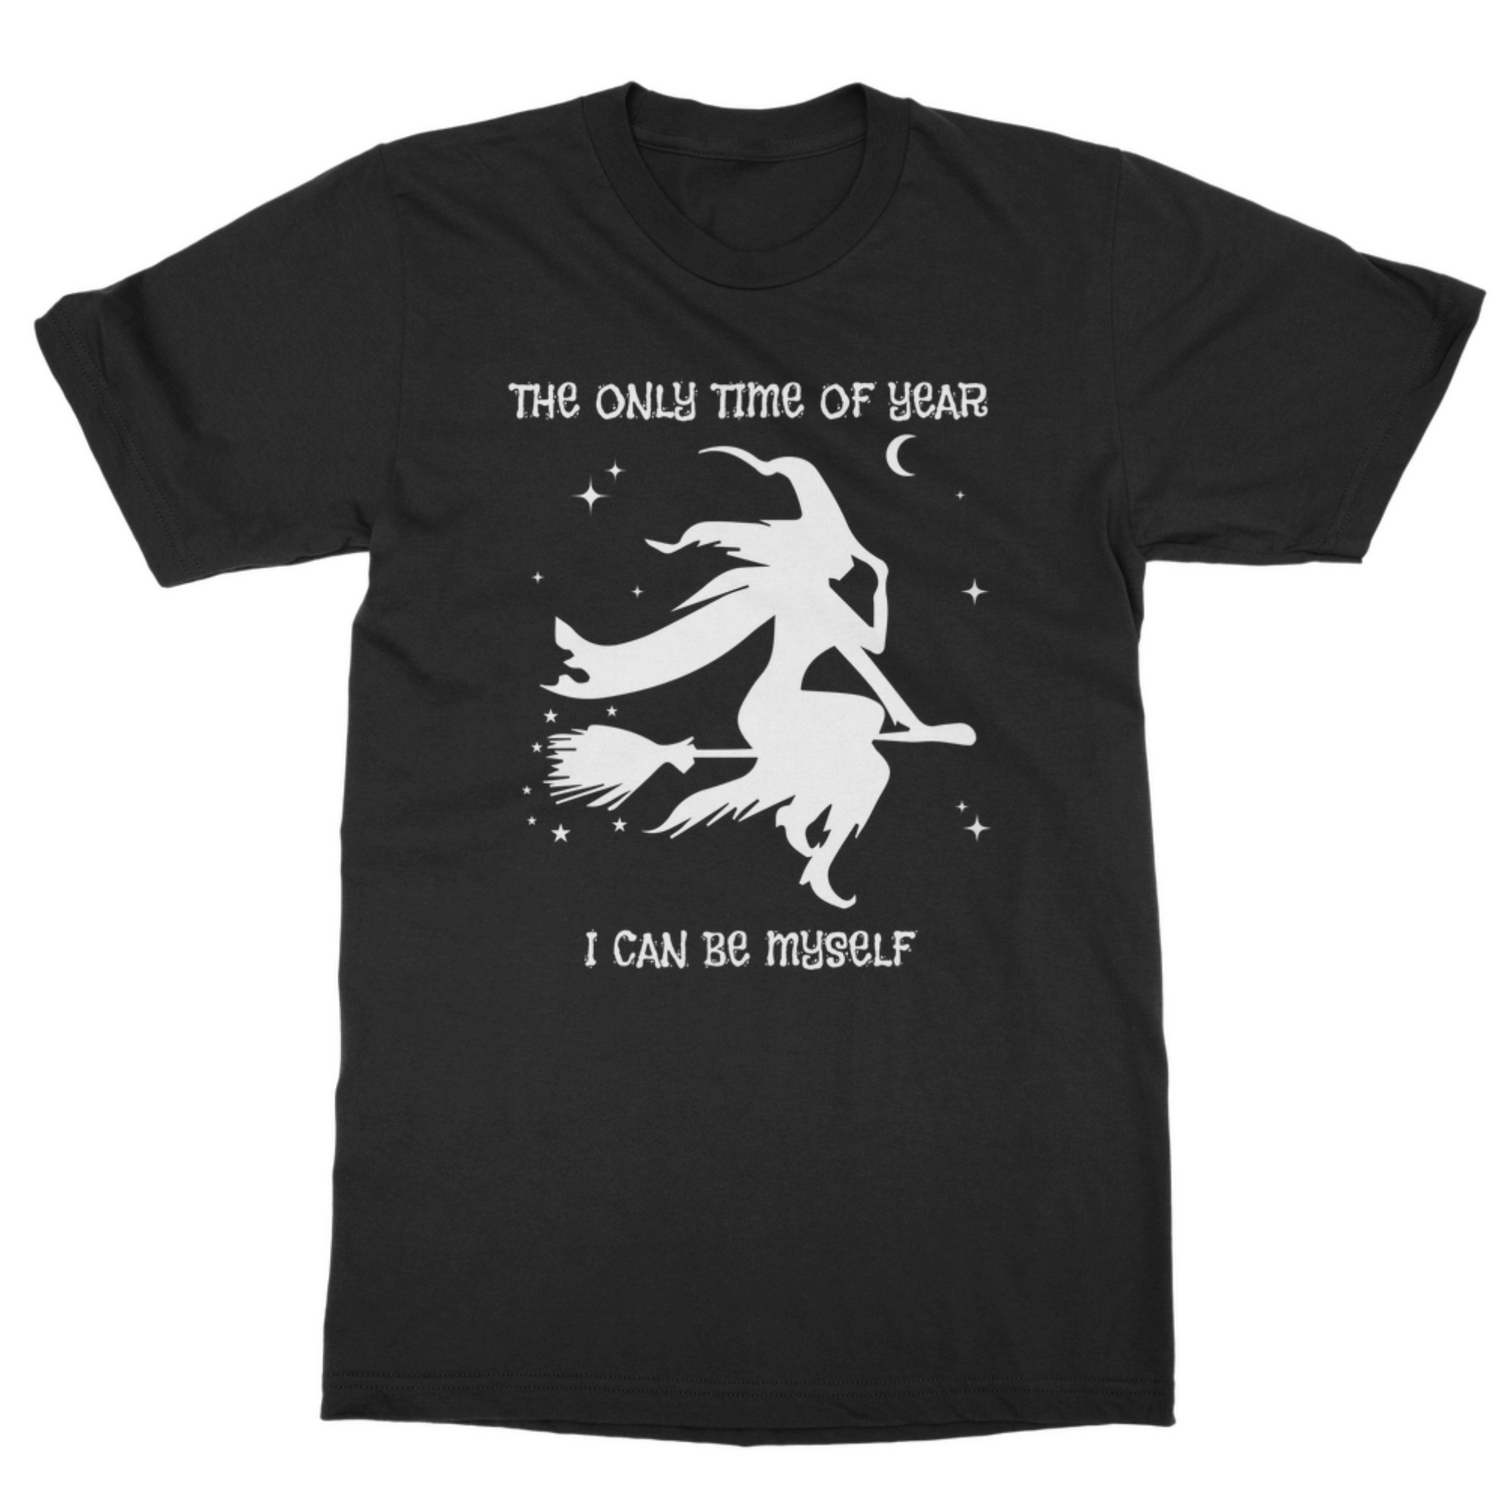 The only time of year I can be myself, funny witch halloween t-shirt